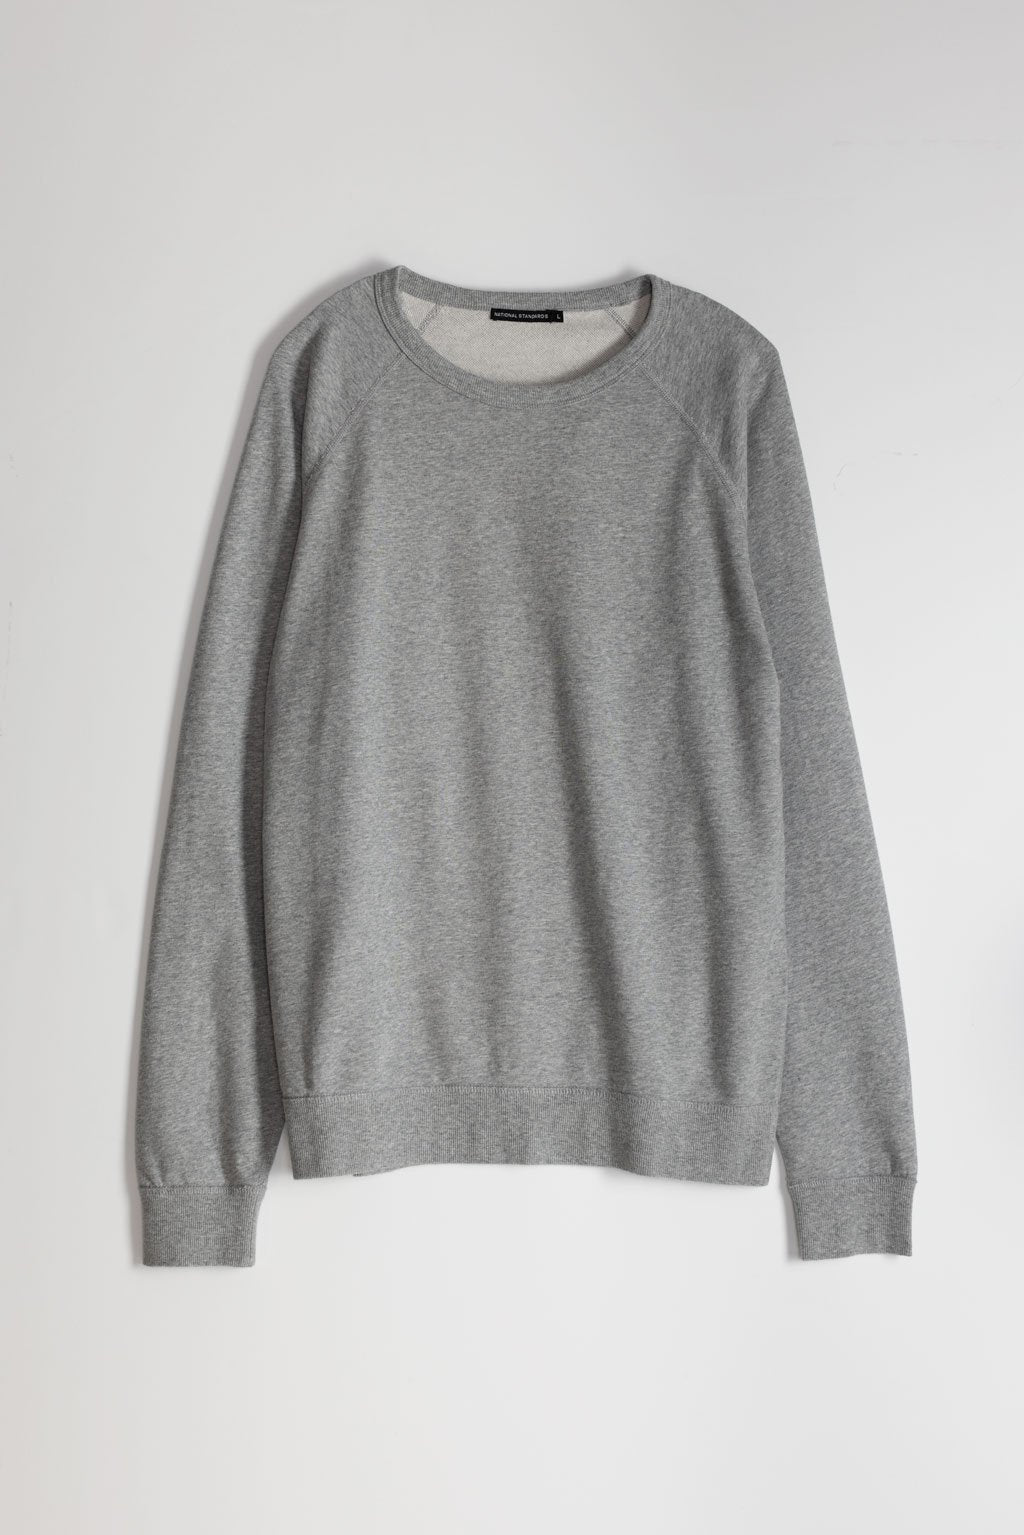 NS2117A-3 250g French Terry Long Sleeve Crew in Melange Grey 01